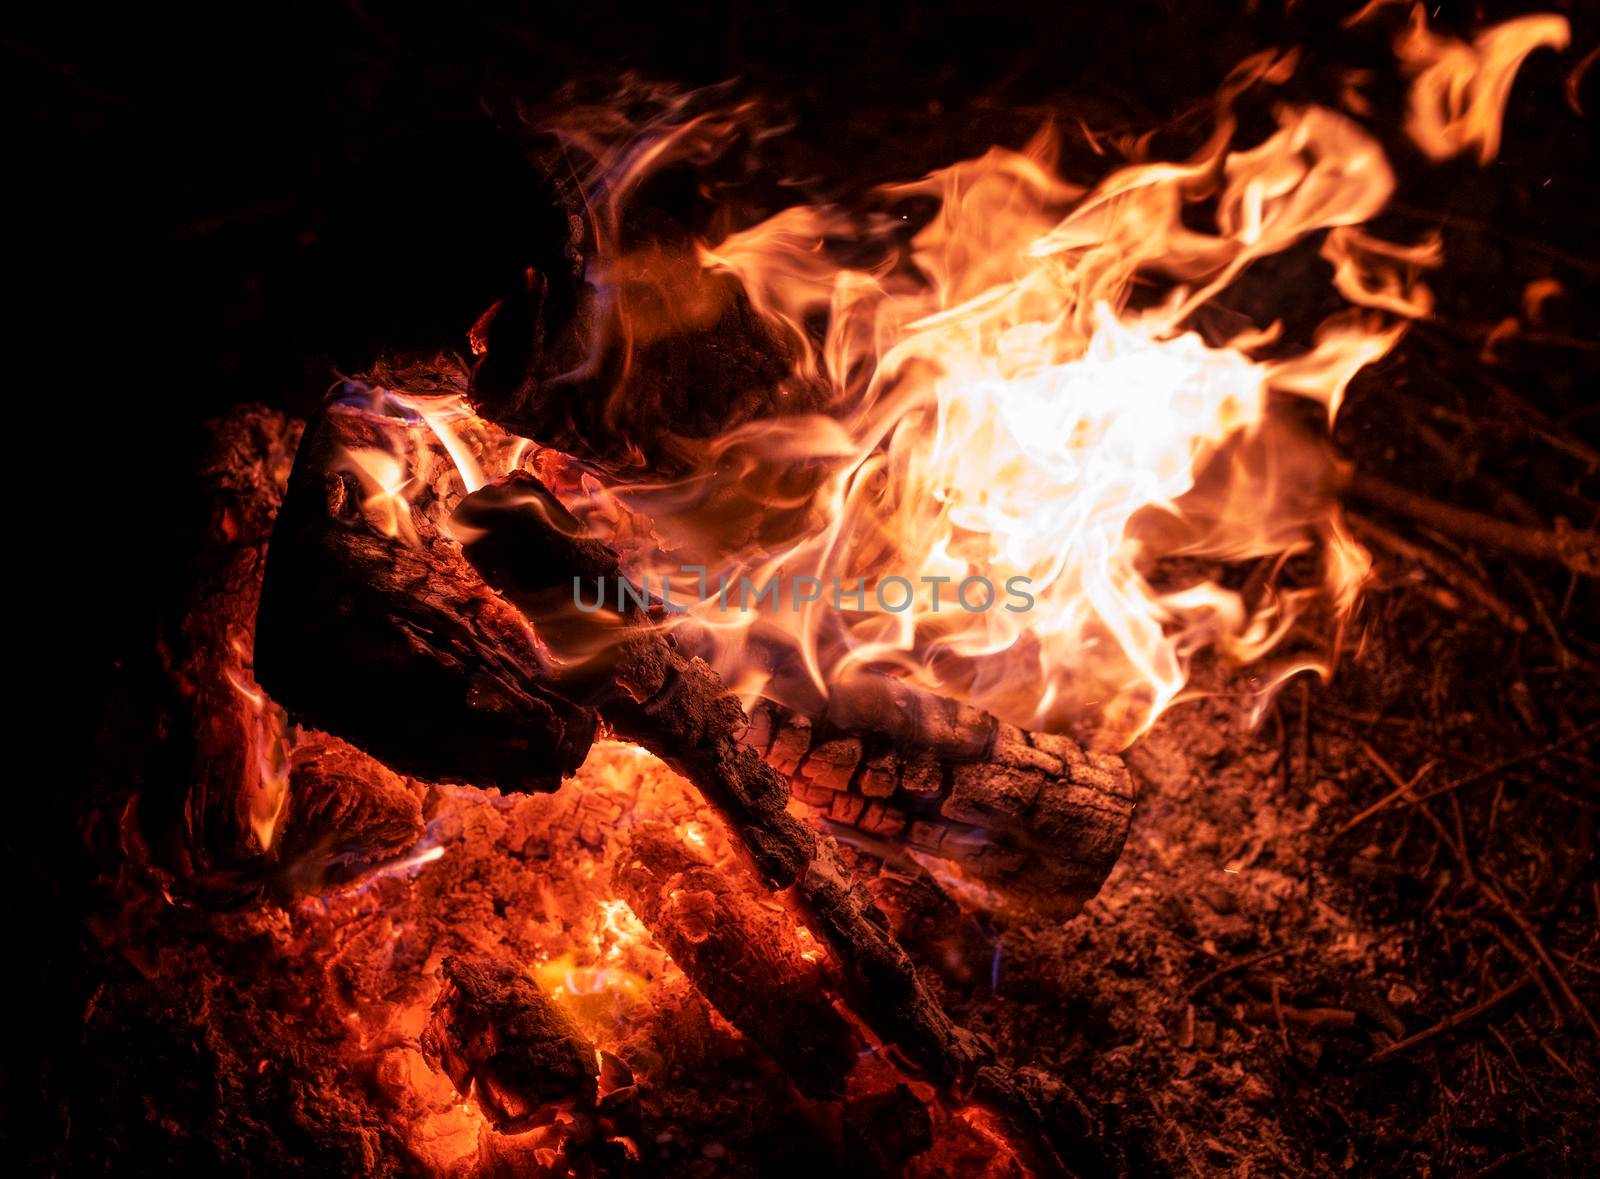 Blazing Fire Flame mbers Burning Woods Outdoor by vilevi